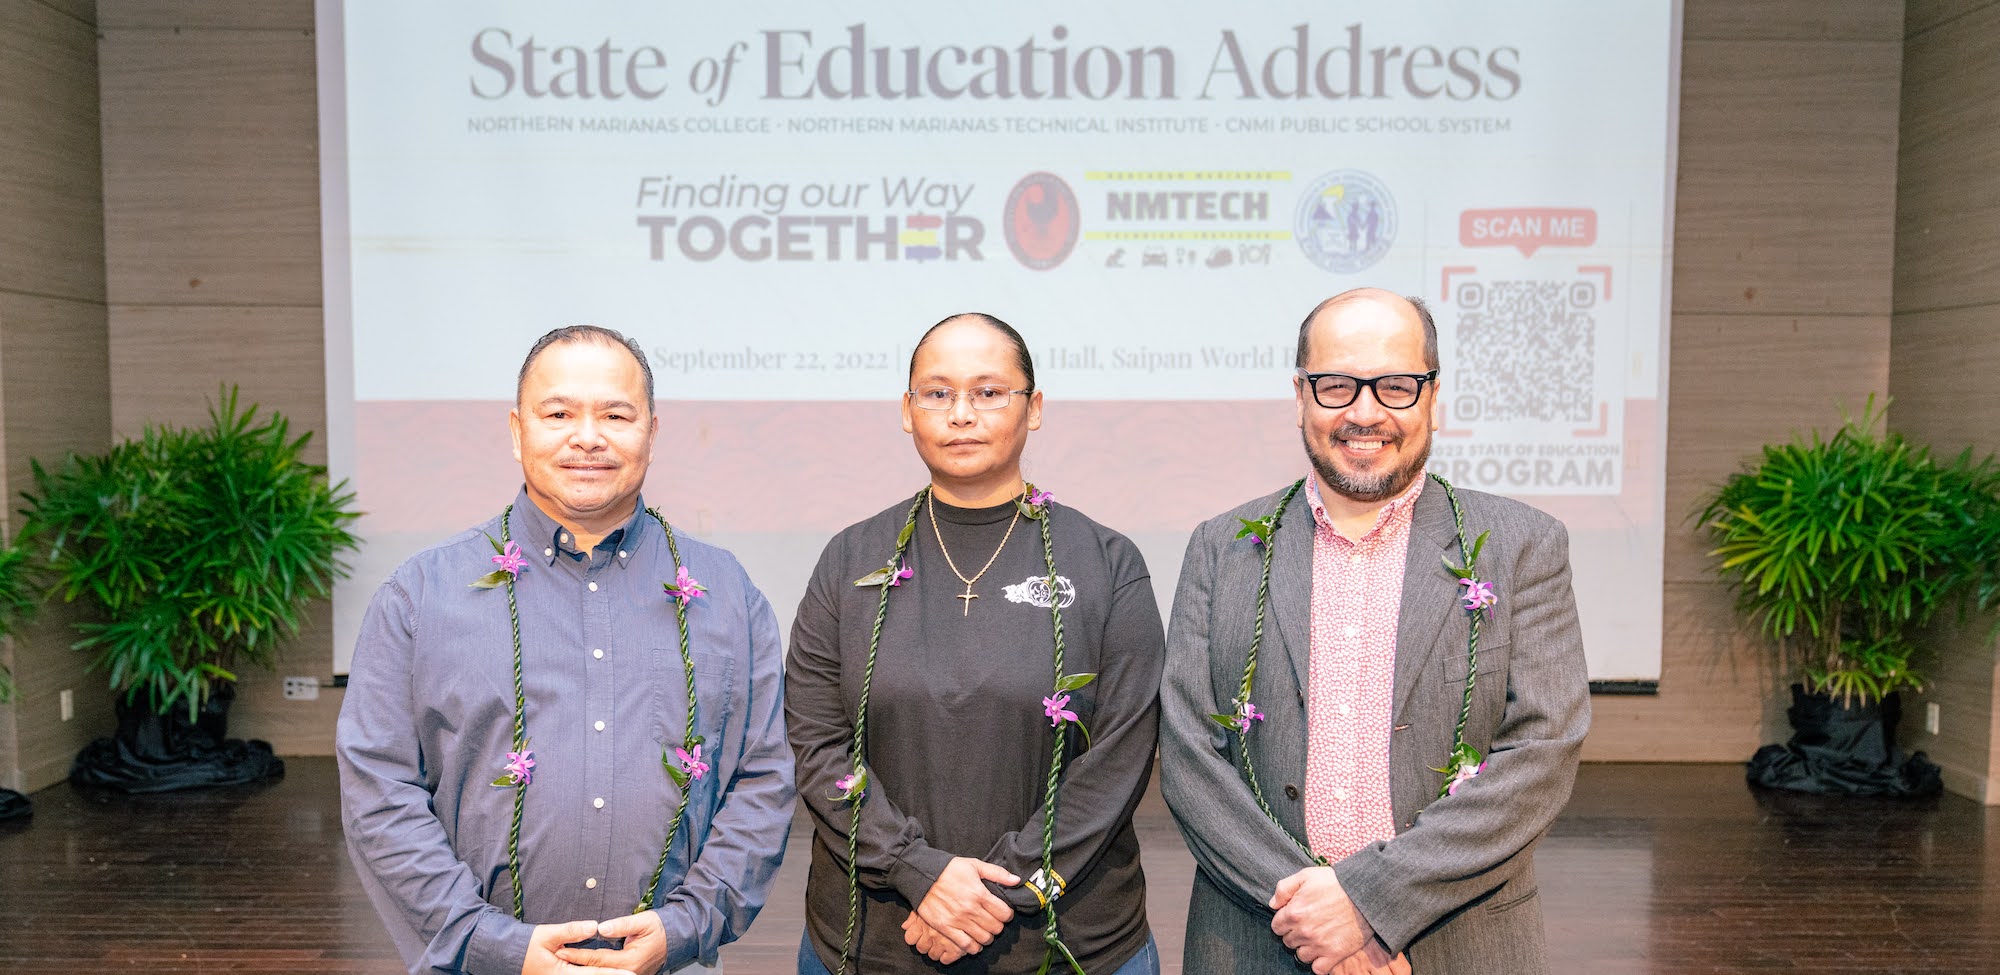 From left, Education Commissioner Dr. Alfred B. Ada, NMTech CEO Jodina Attao, and NMC president Dr. Galvin Deleon Guerrero stand in front of the crowd prior to the start of the Educational Summit at the Royal Taga Ballroom of Saipan World Resort last Thursday.